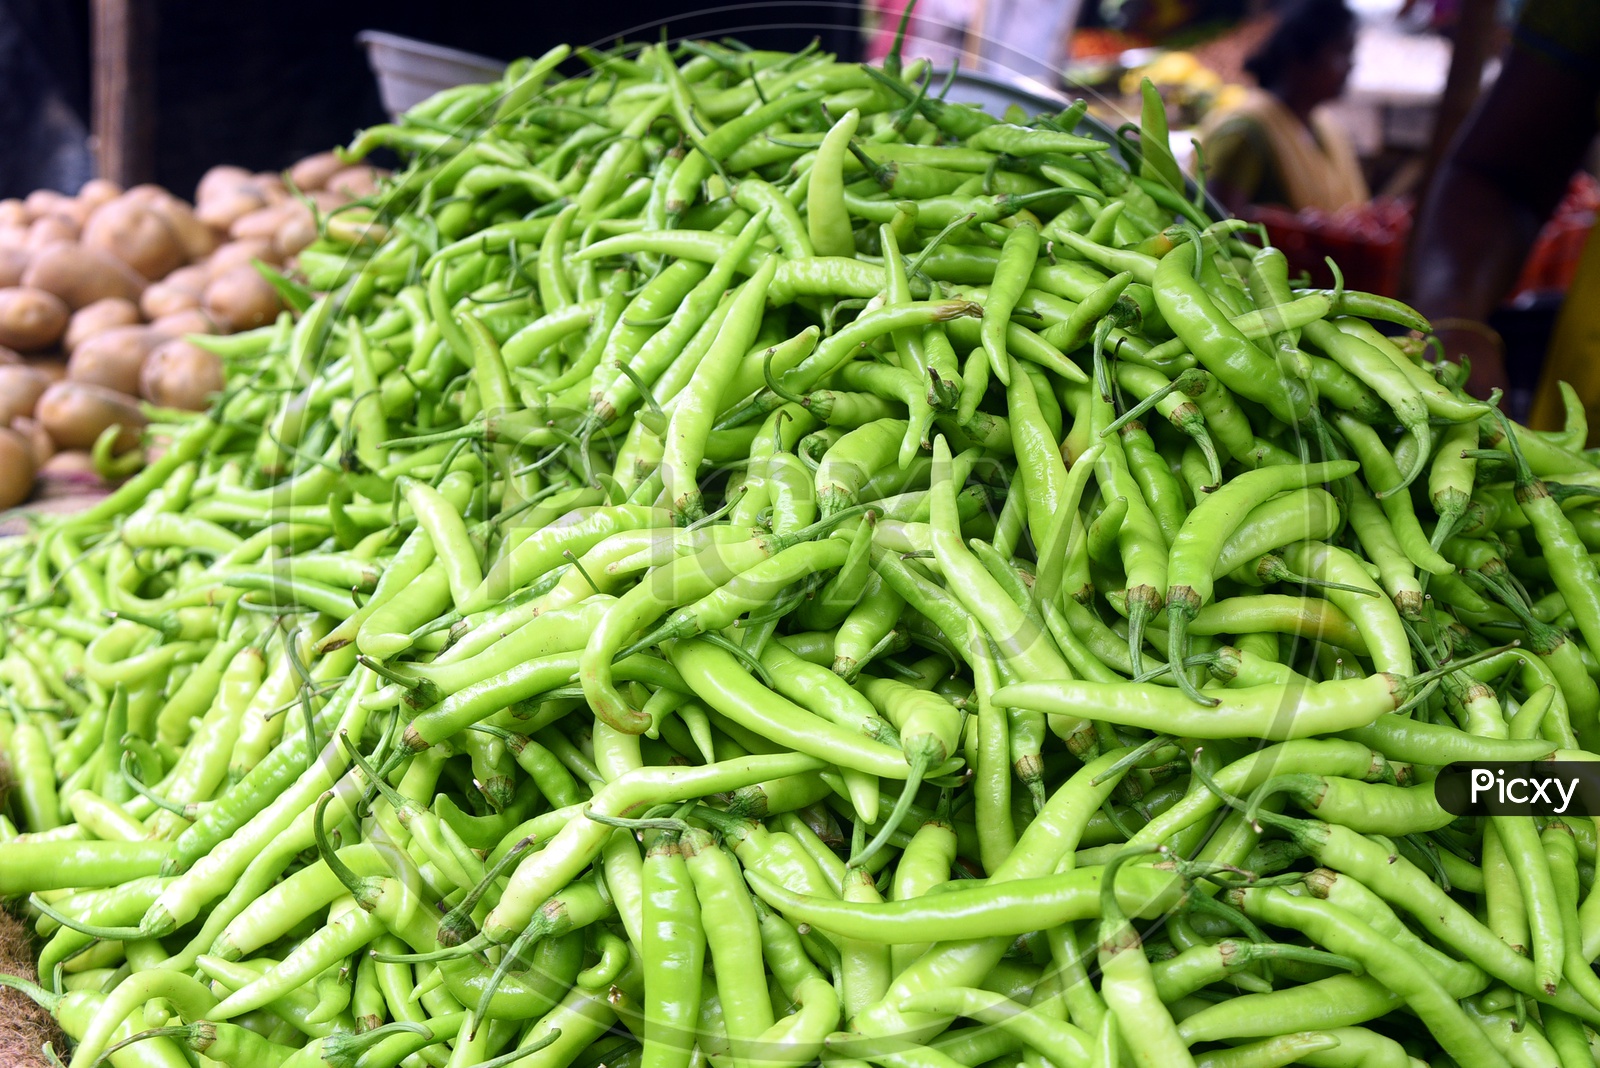 A pile of Green chillies in a vegetable market